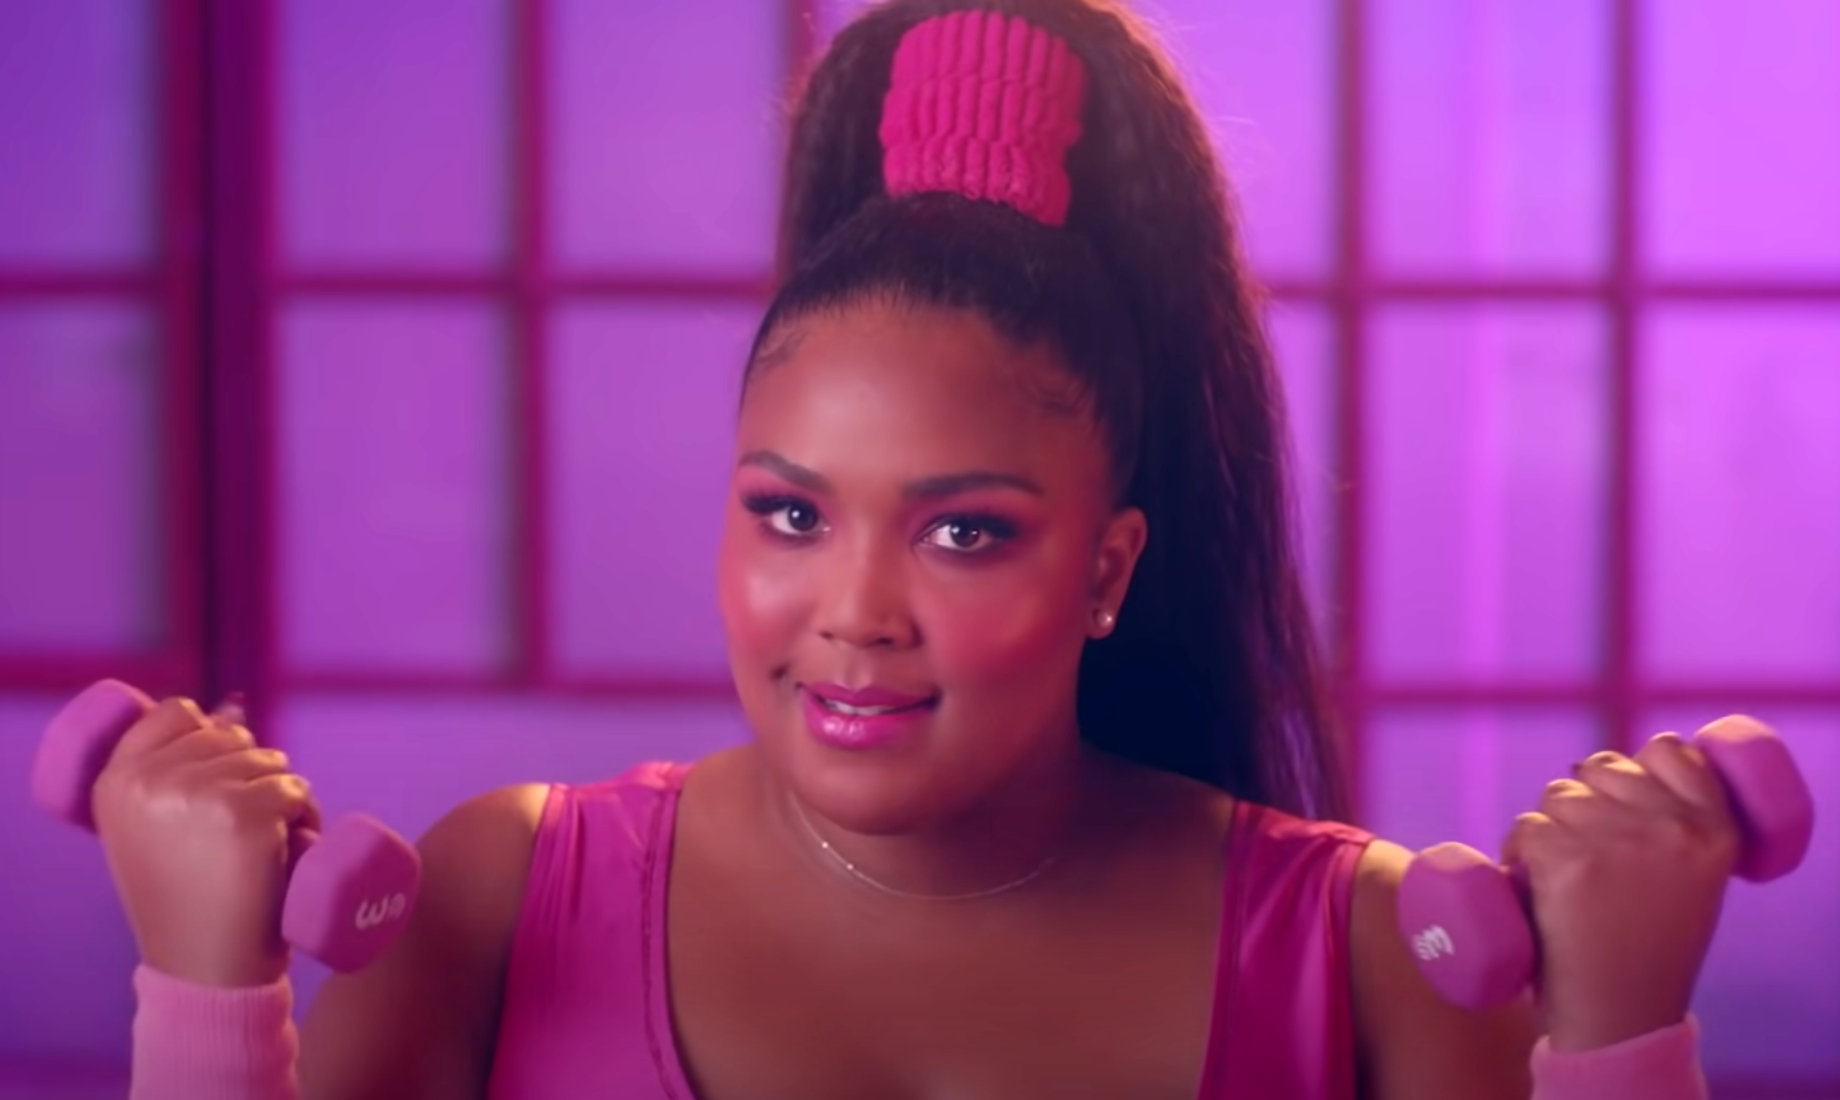 The enemy isn’t Lizzo, it’s toxic diet culture